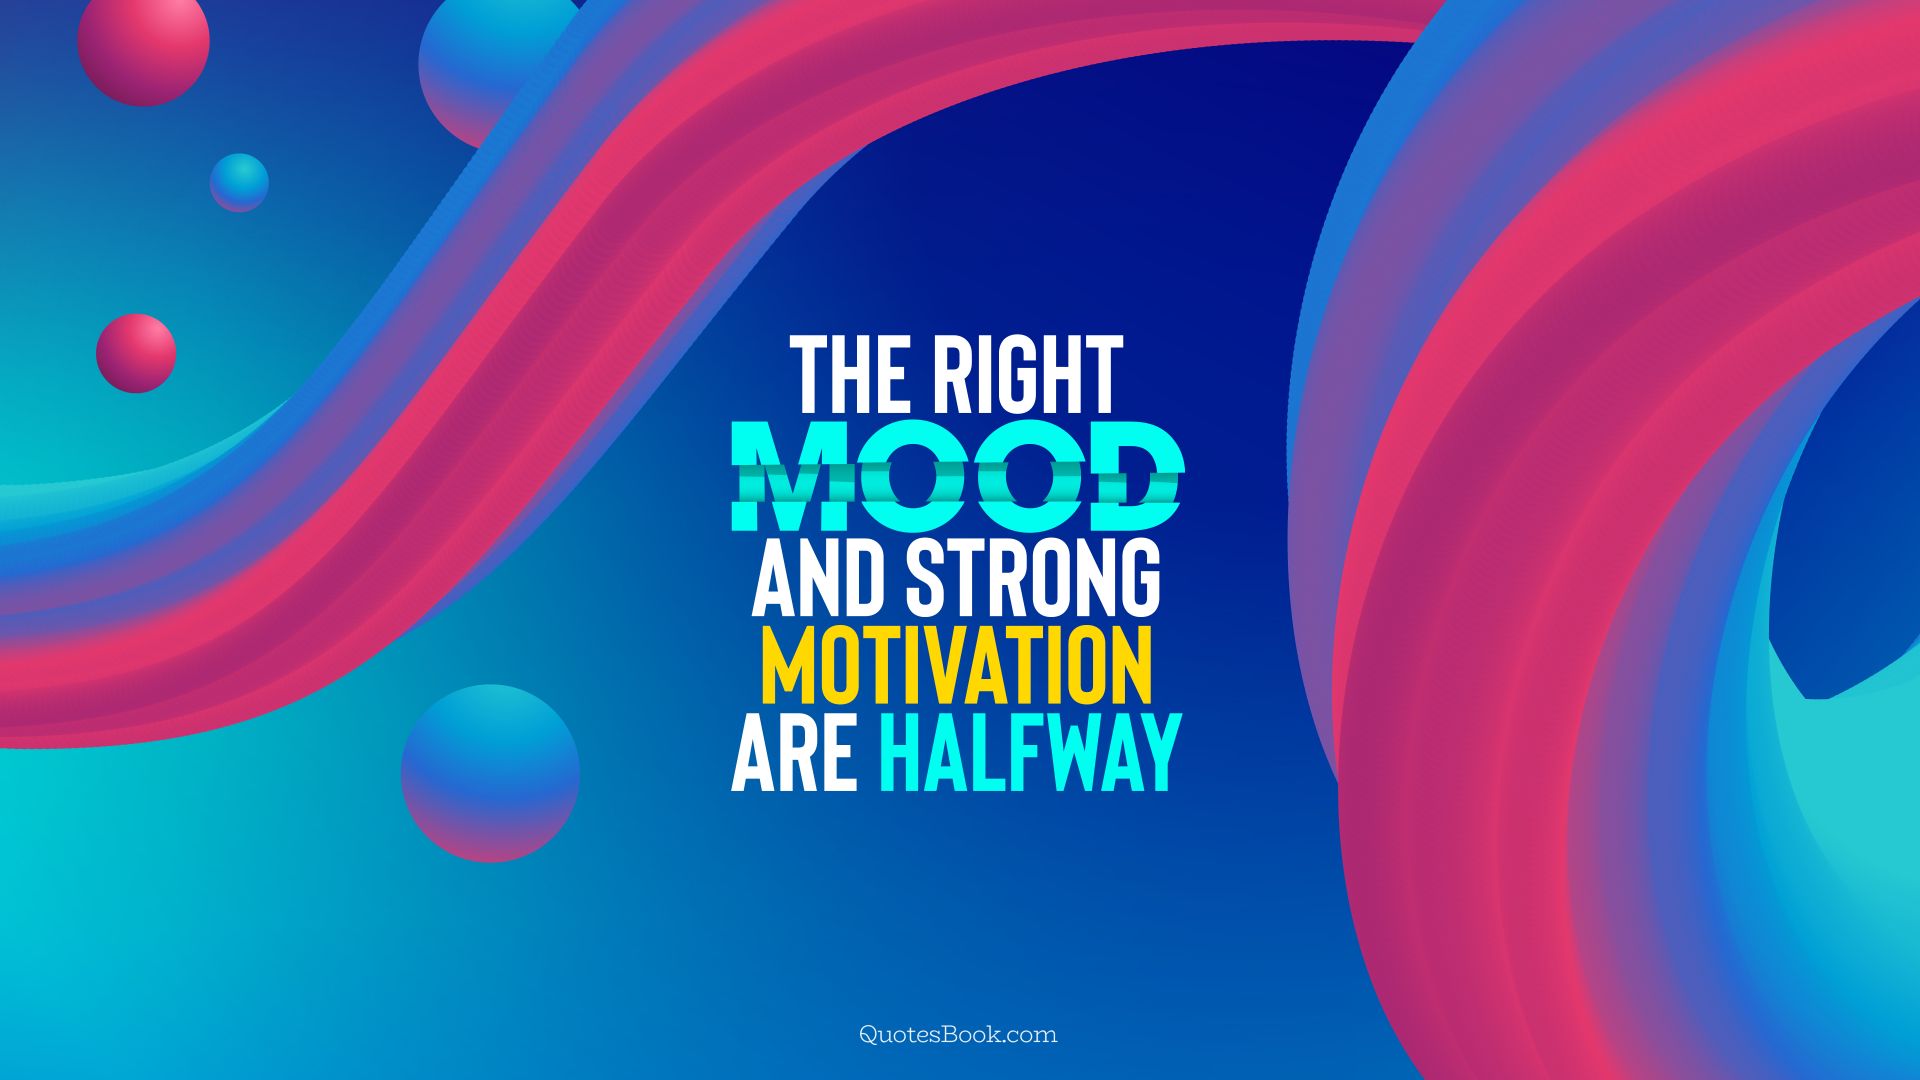 The right mood and strong motivation are halfway